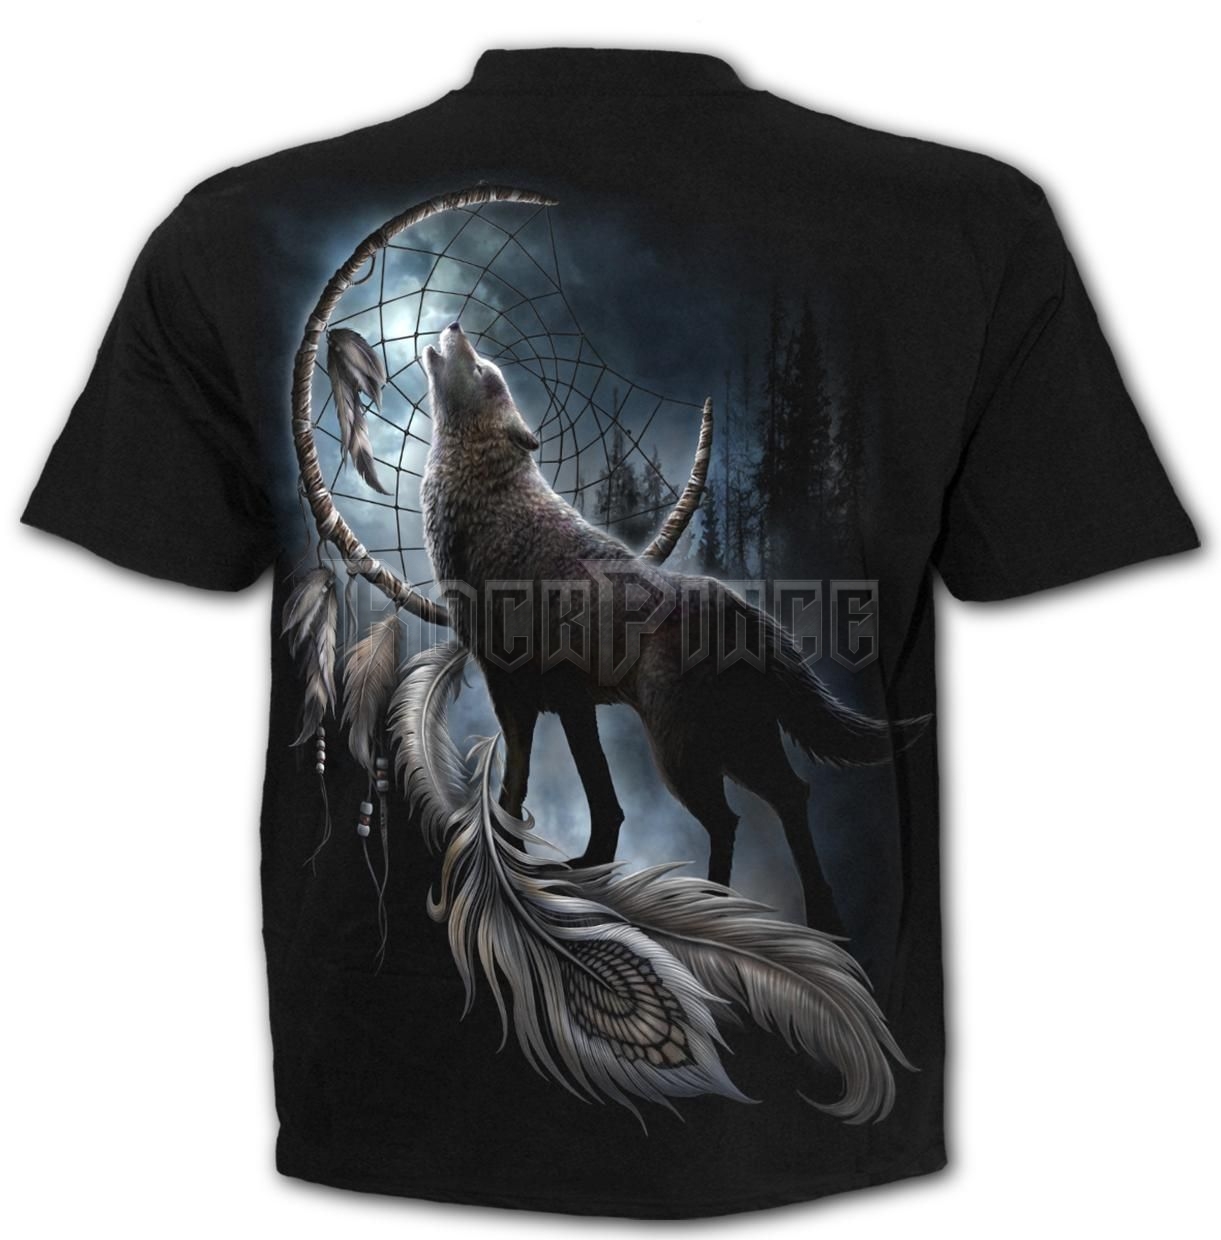 FROM DARKNESS - T-Shirt Black - M034M101